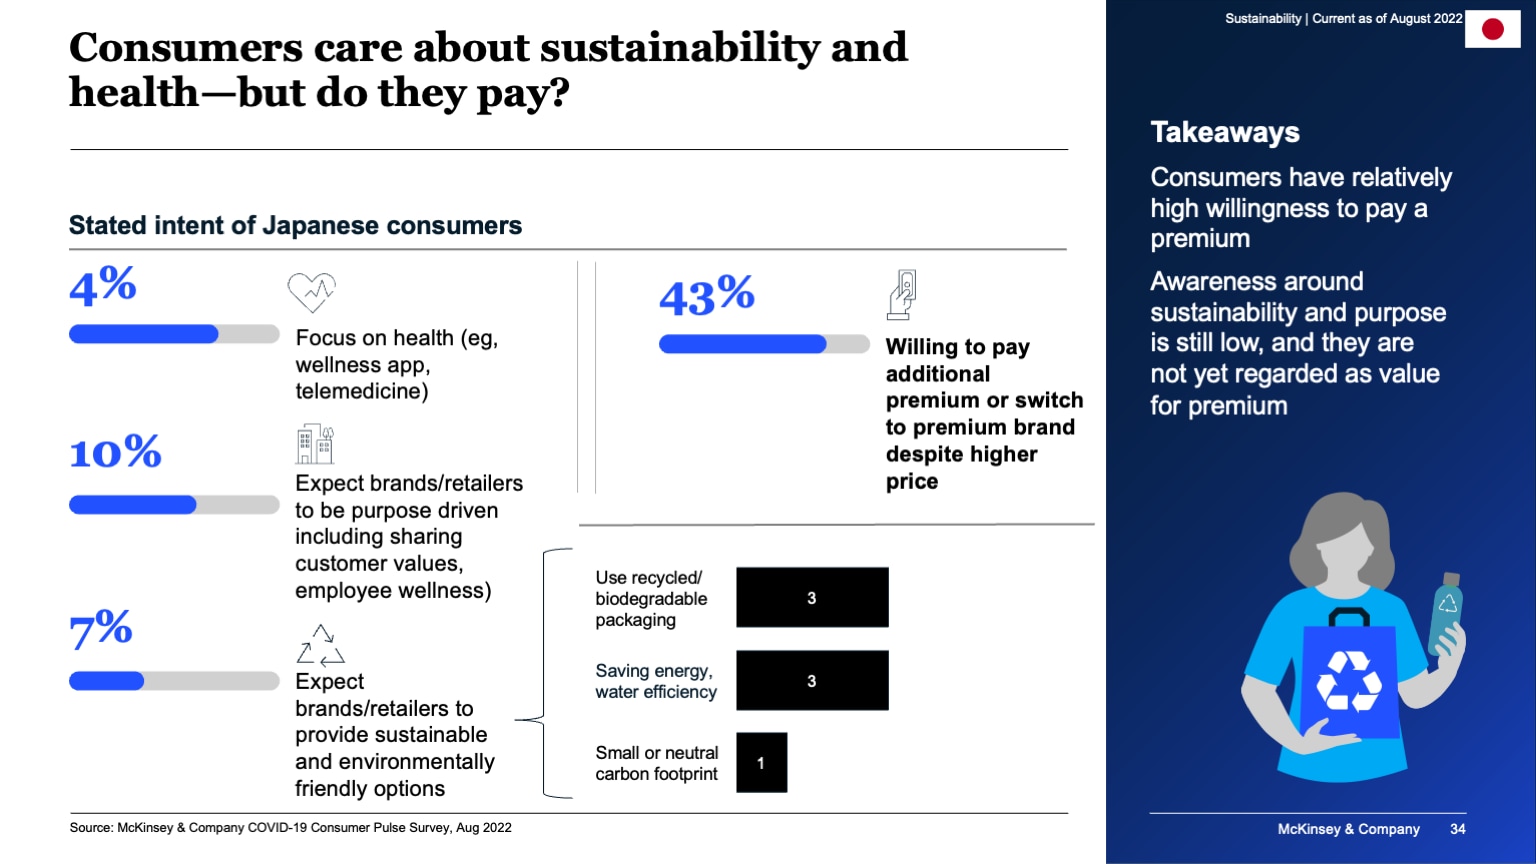 Consumers care about sustainability and health--but do they pay?